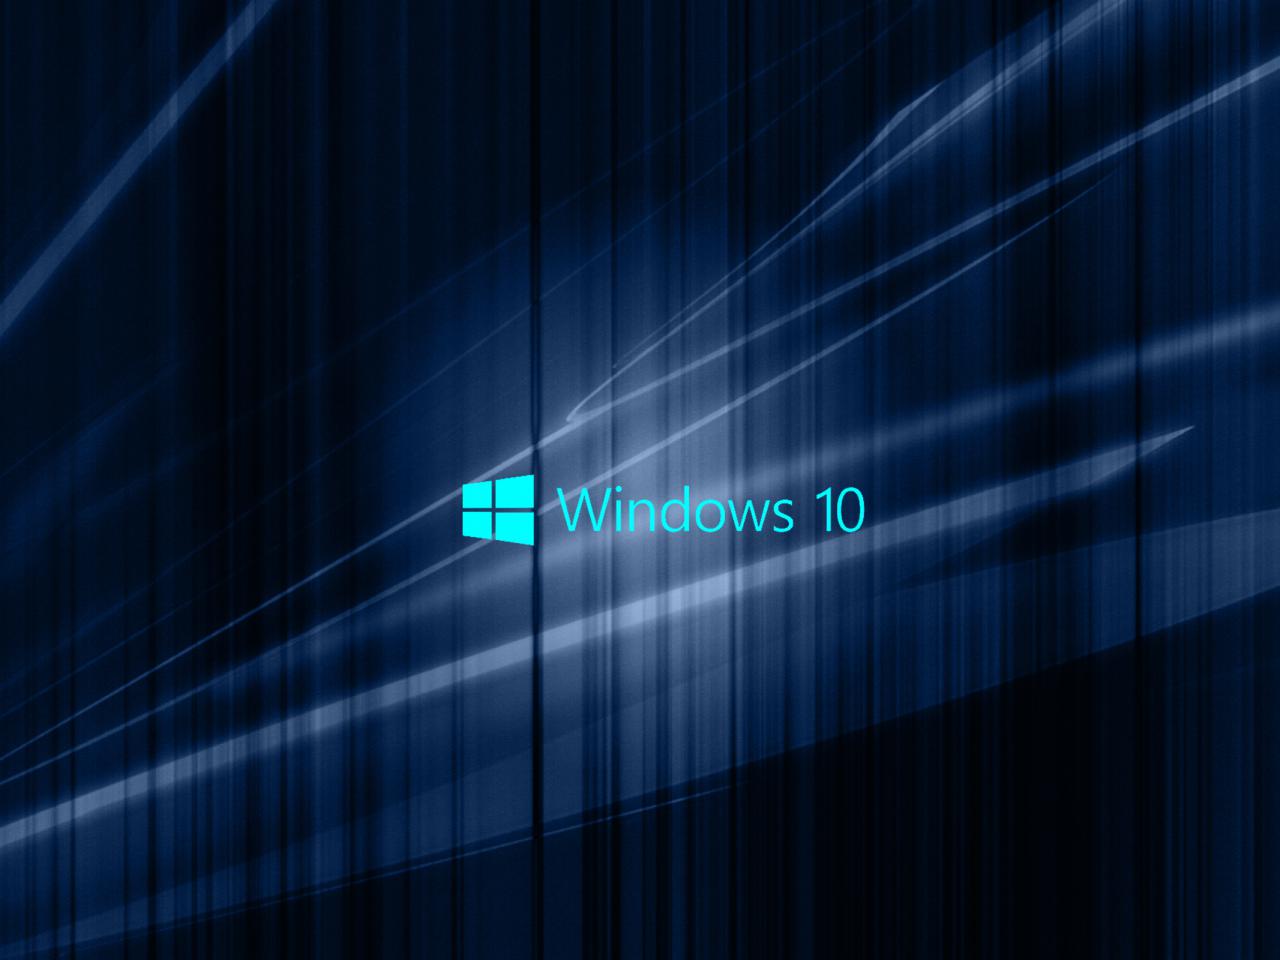 Free download Windows 10 Wallpaper with Blue Abstract Waves HD ...